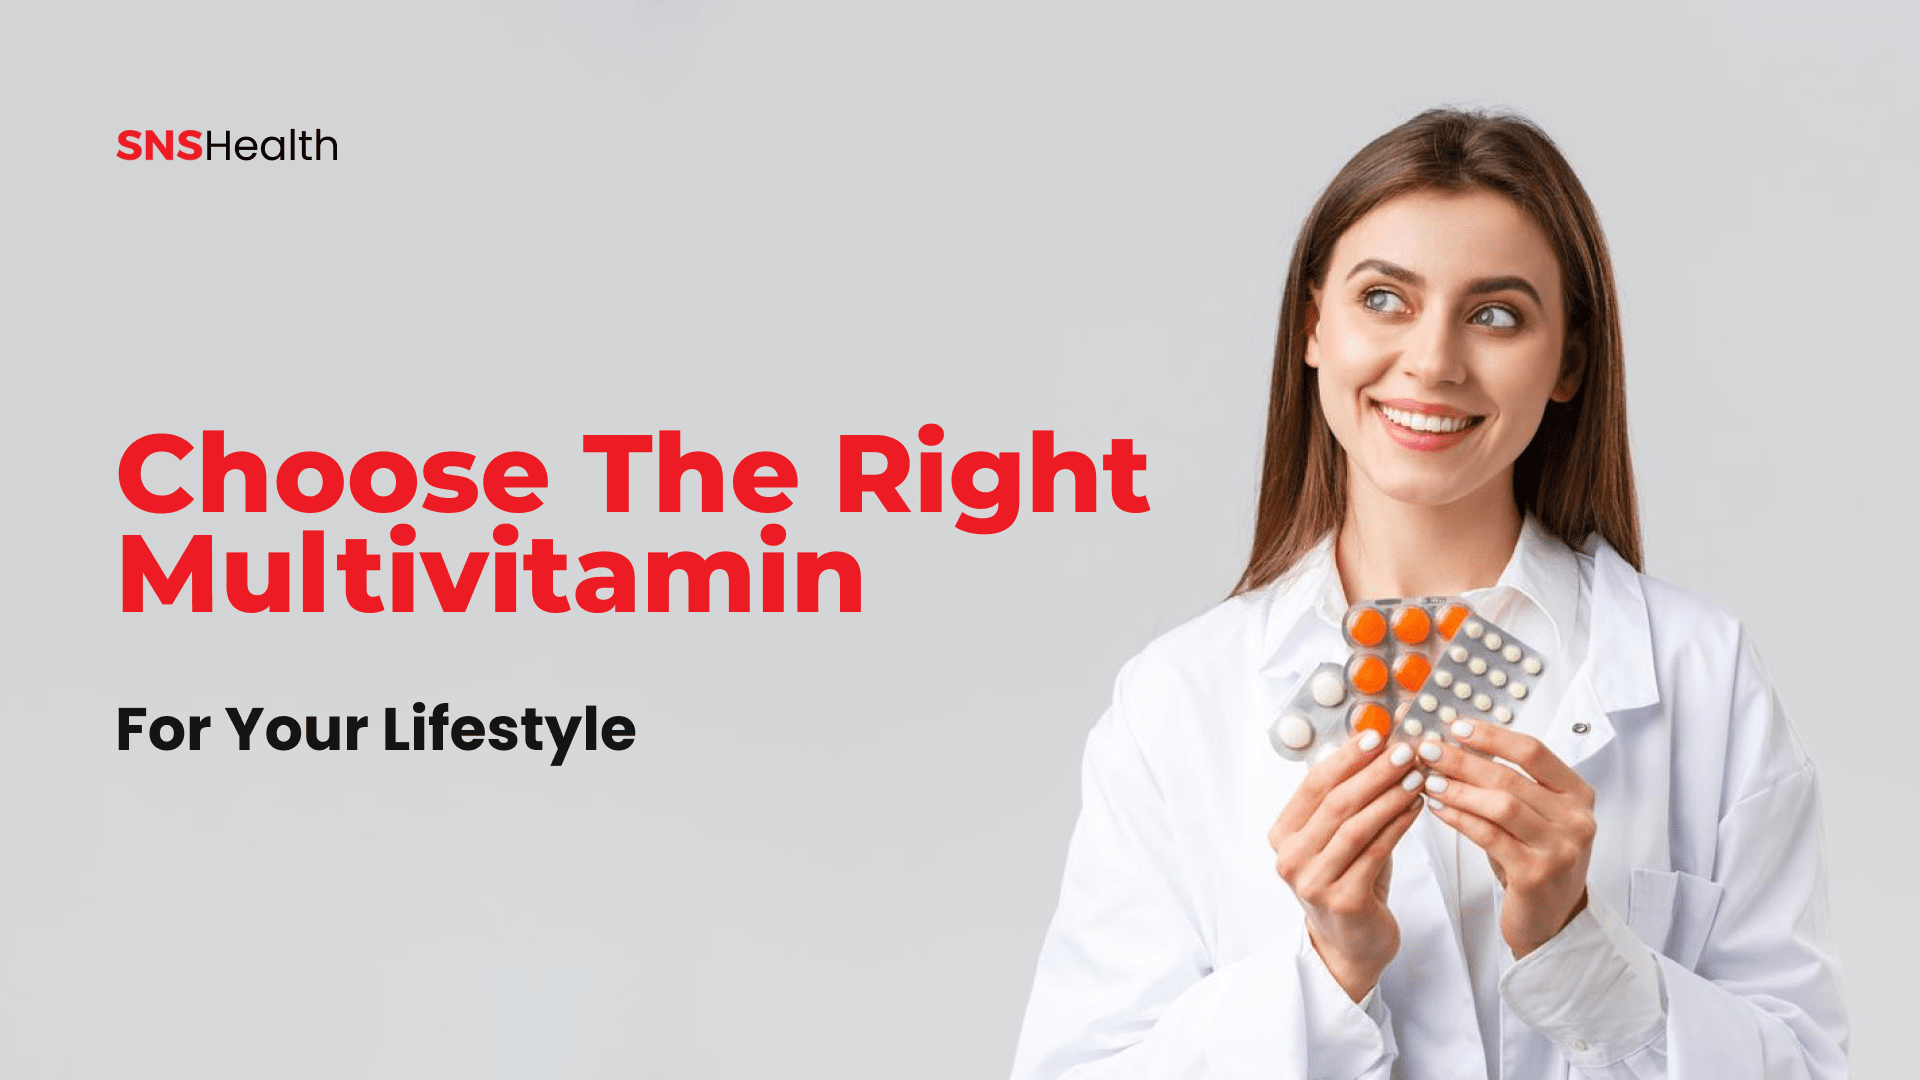 How to choose the right multivitamin for your lifestyle?